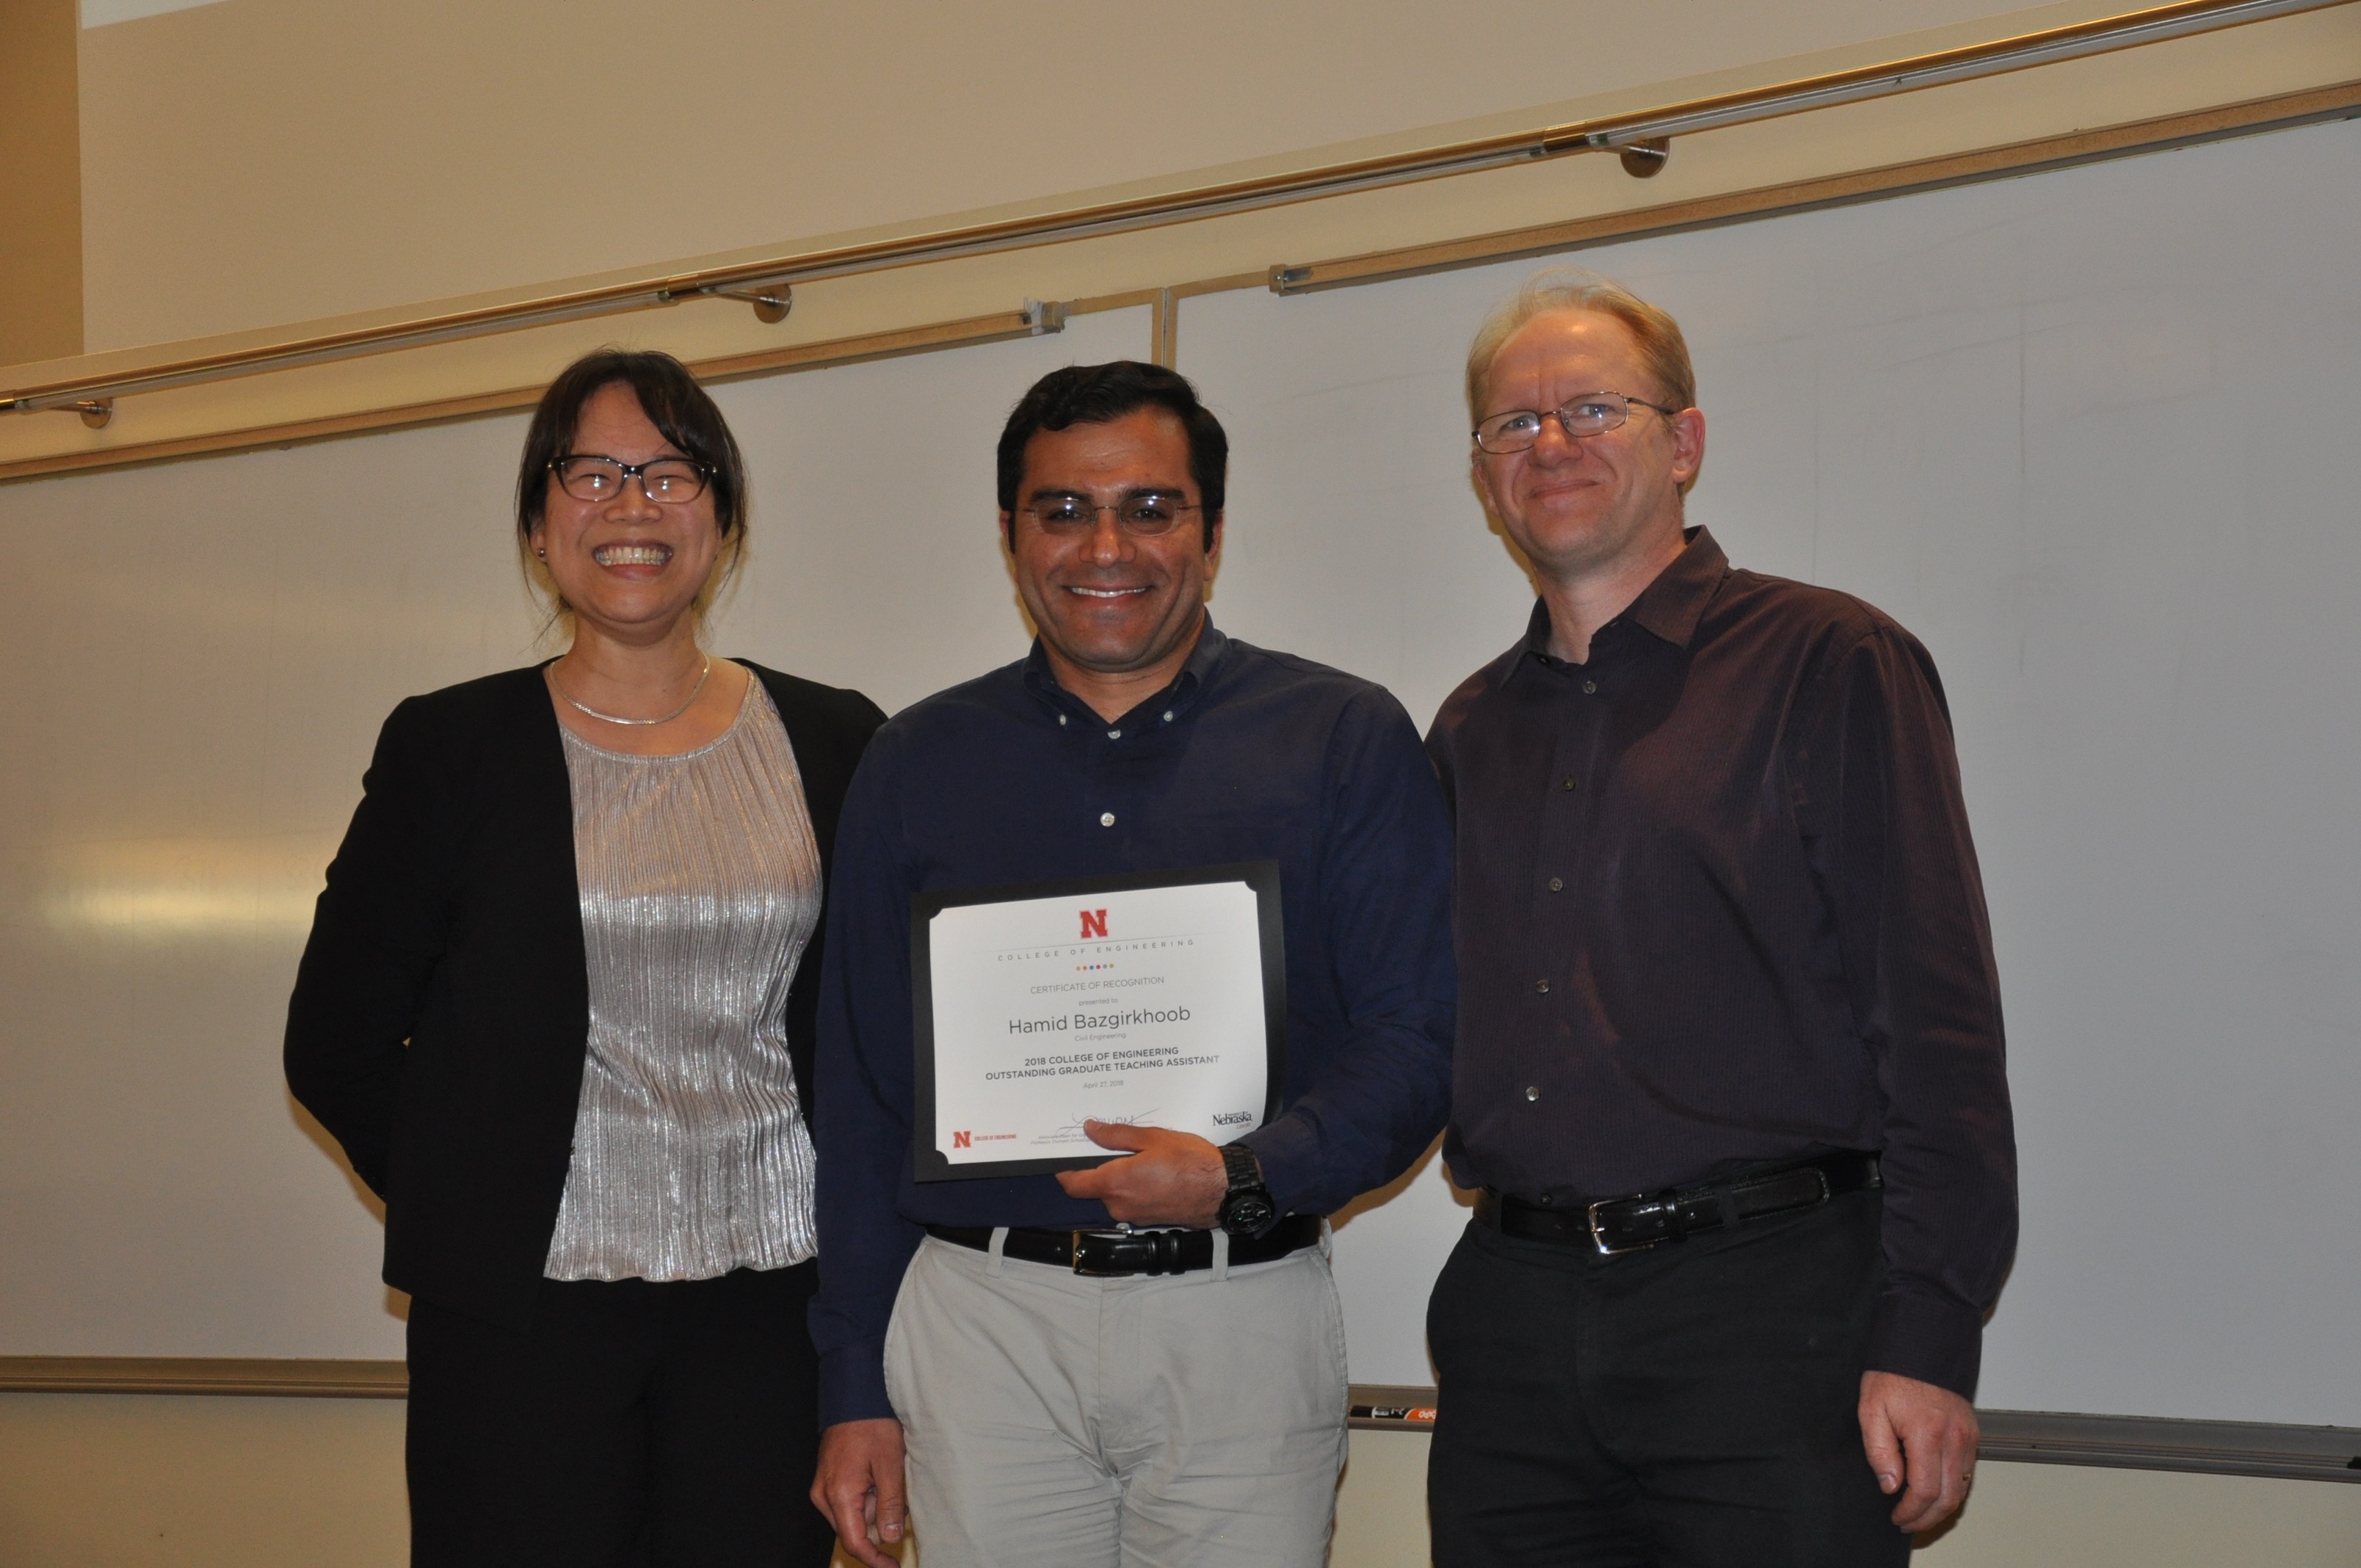 Hamid Bazgirkhoob (center) was chosen as the 2018 Outstanding Graduate Teaching Assistant. His award was presented by Lily Wang (left) and David Admiraal. 